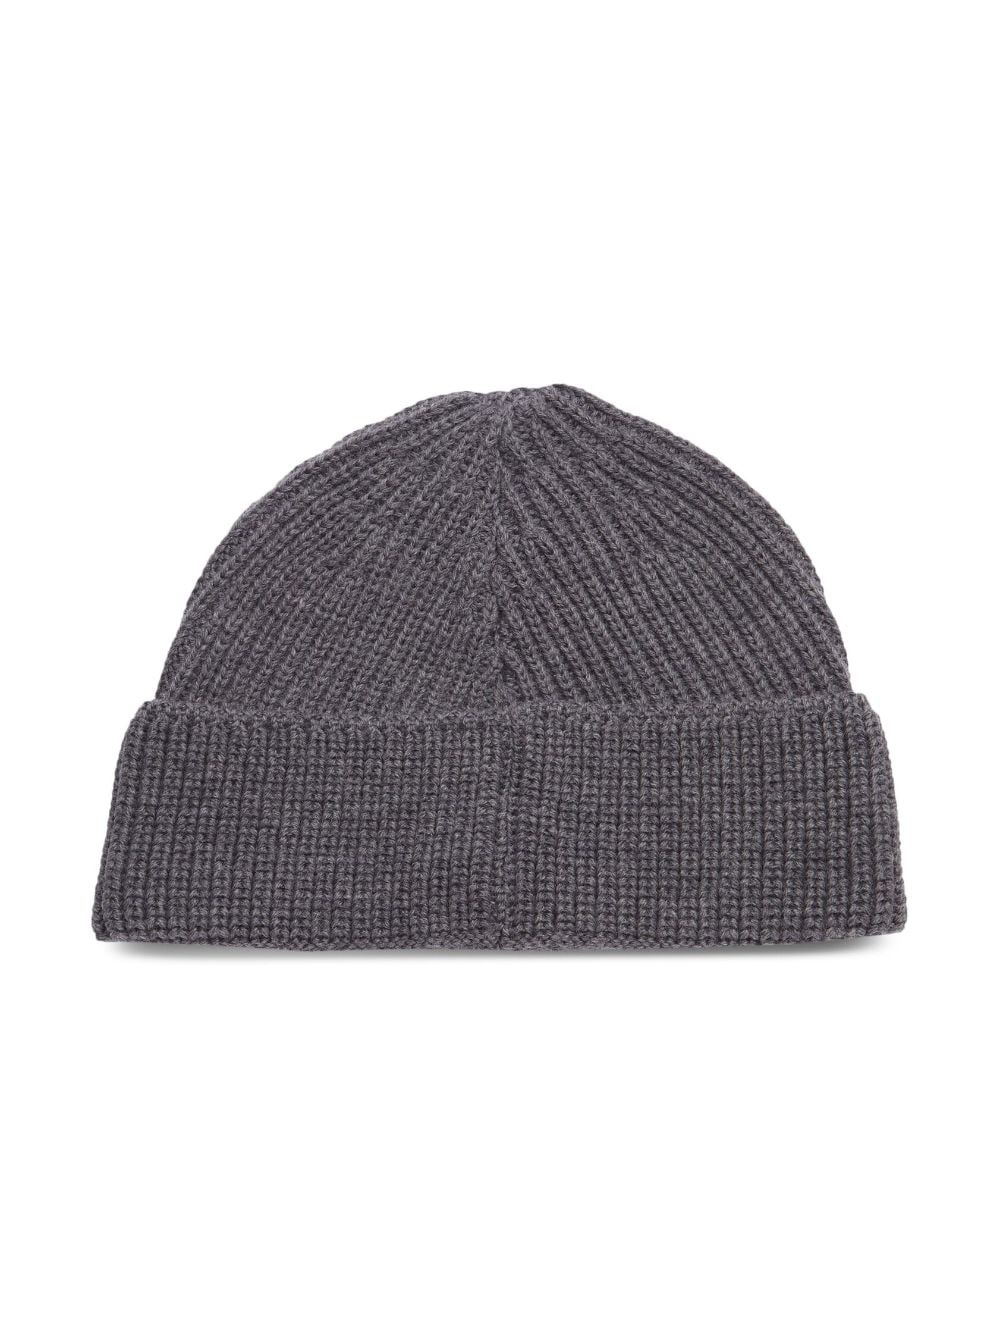 embroidered-logo knit wool beanie - 2